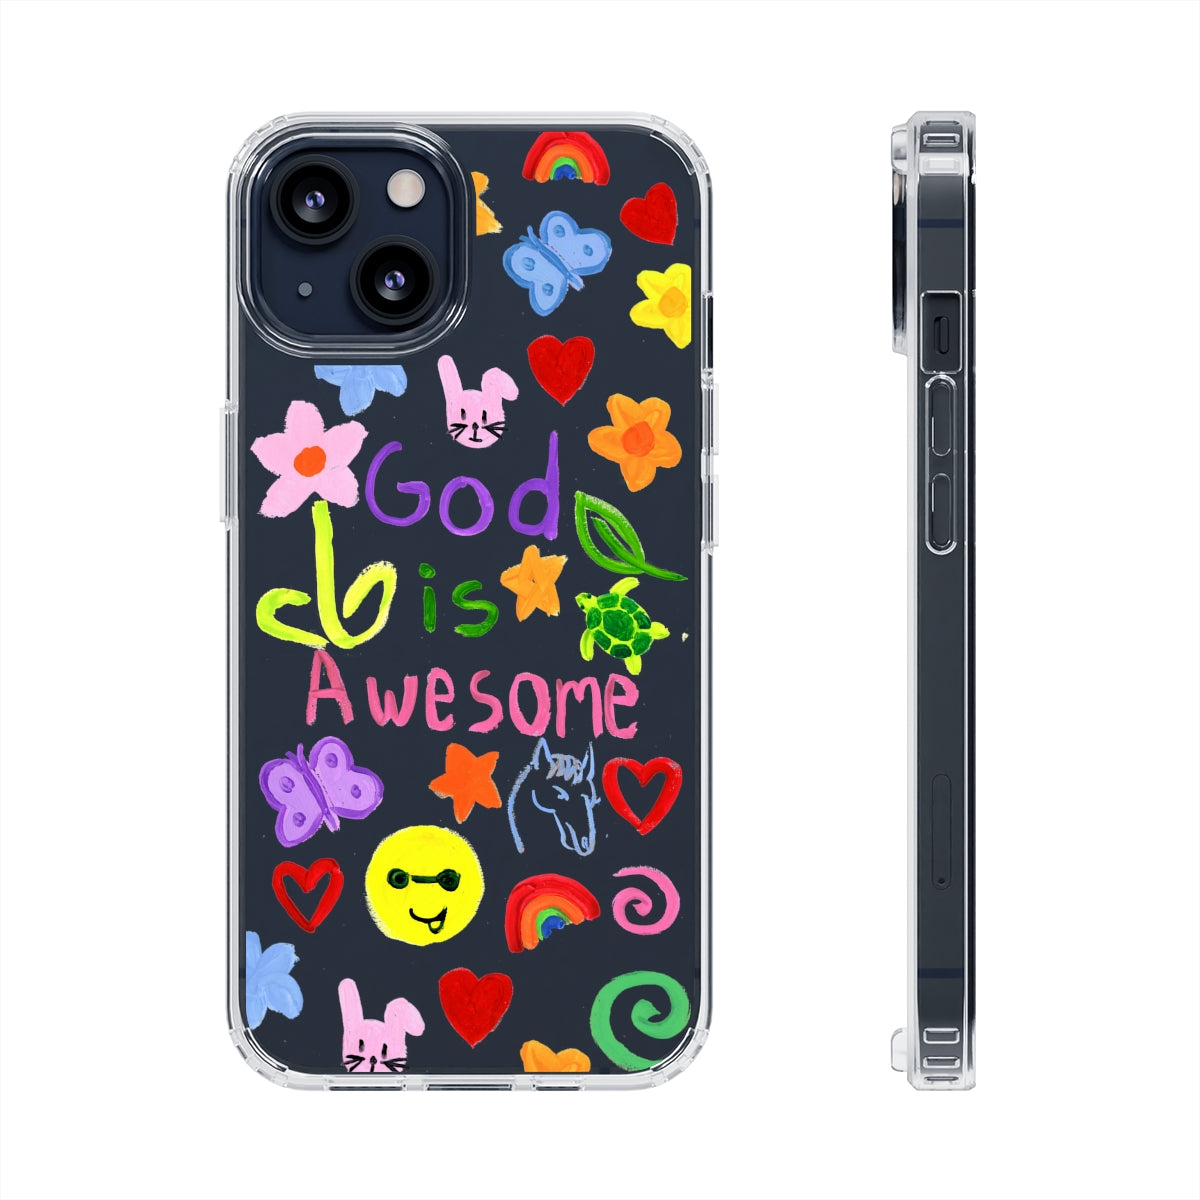 GOD IS AWESOME IPHONE CASE